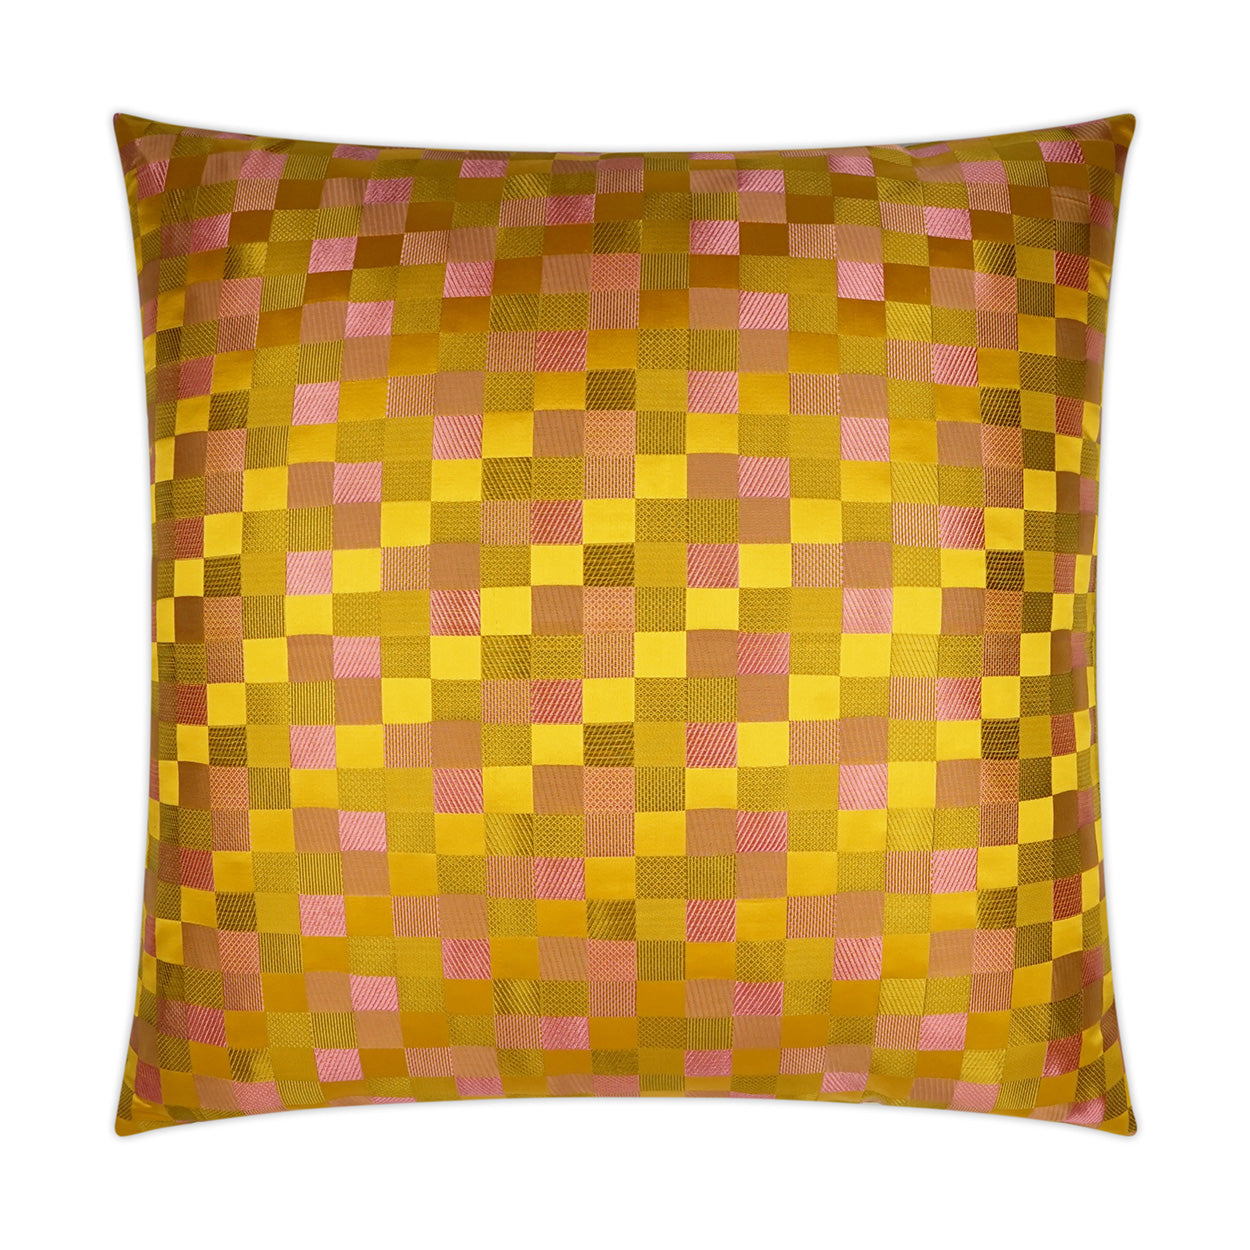 Luxury Lumbar Pillow - 24" x 14" - Cubit Gold; Shimmering Gold, Mustard and Pink Textural Squares